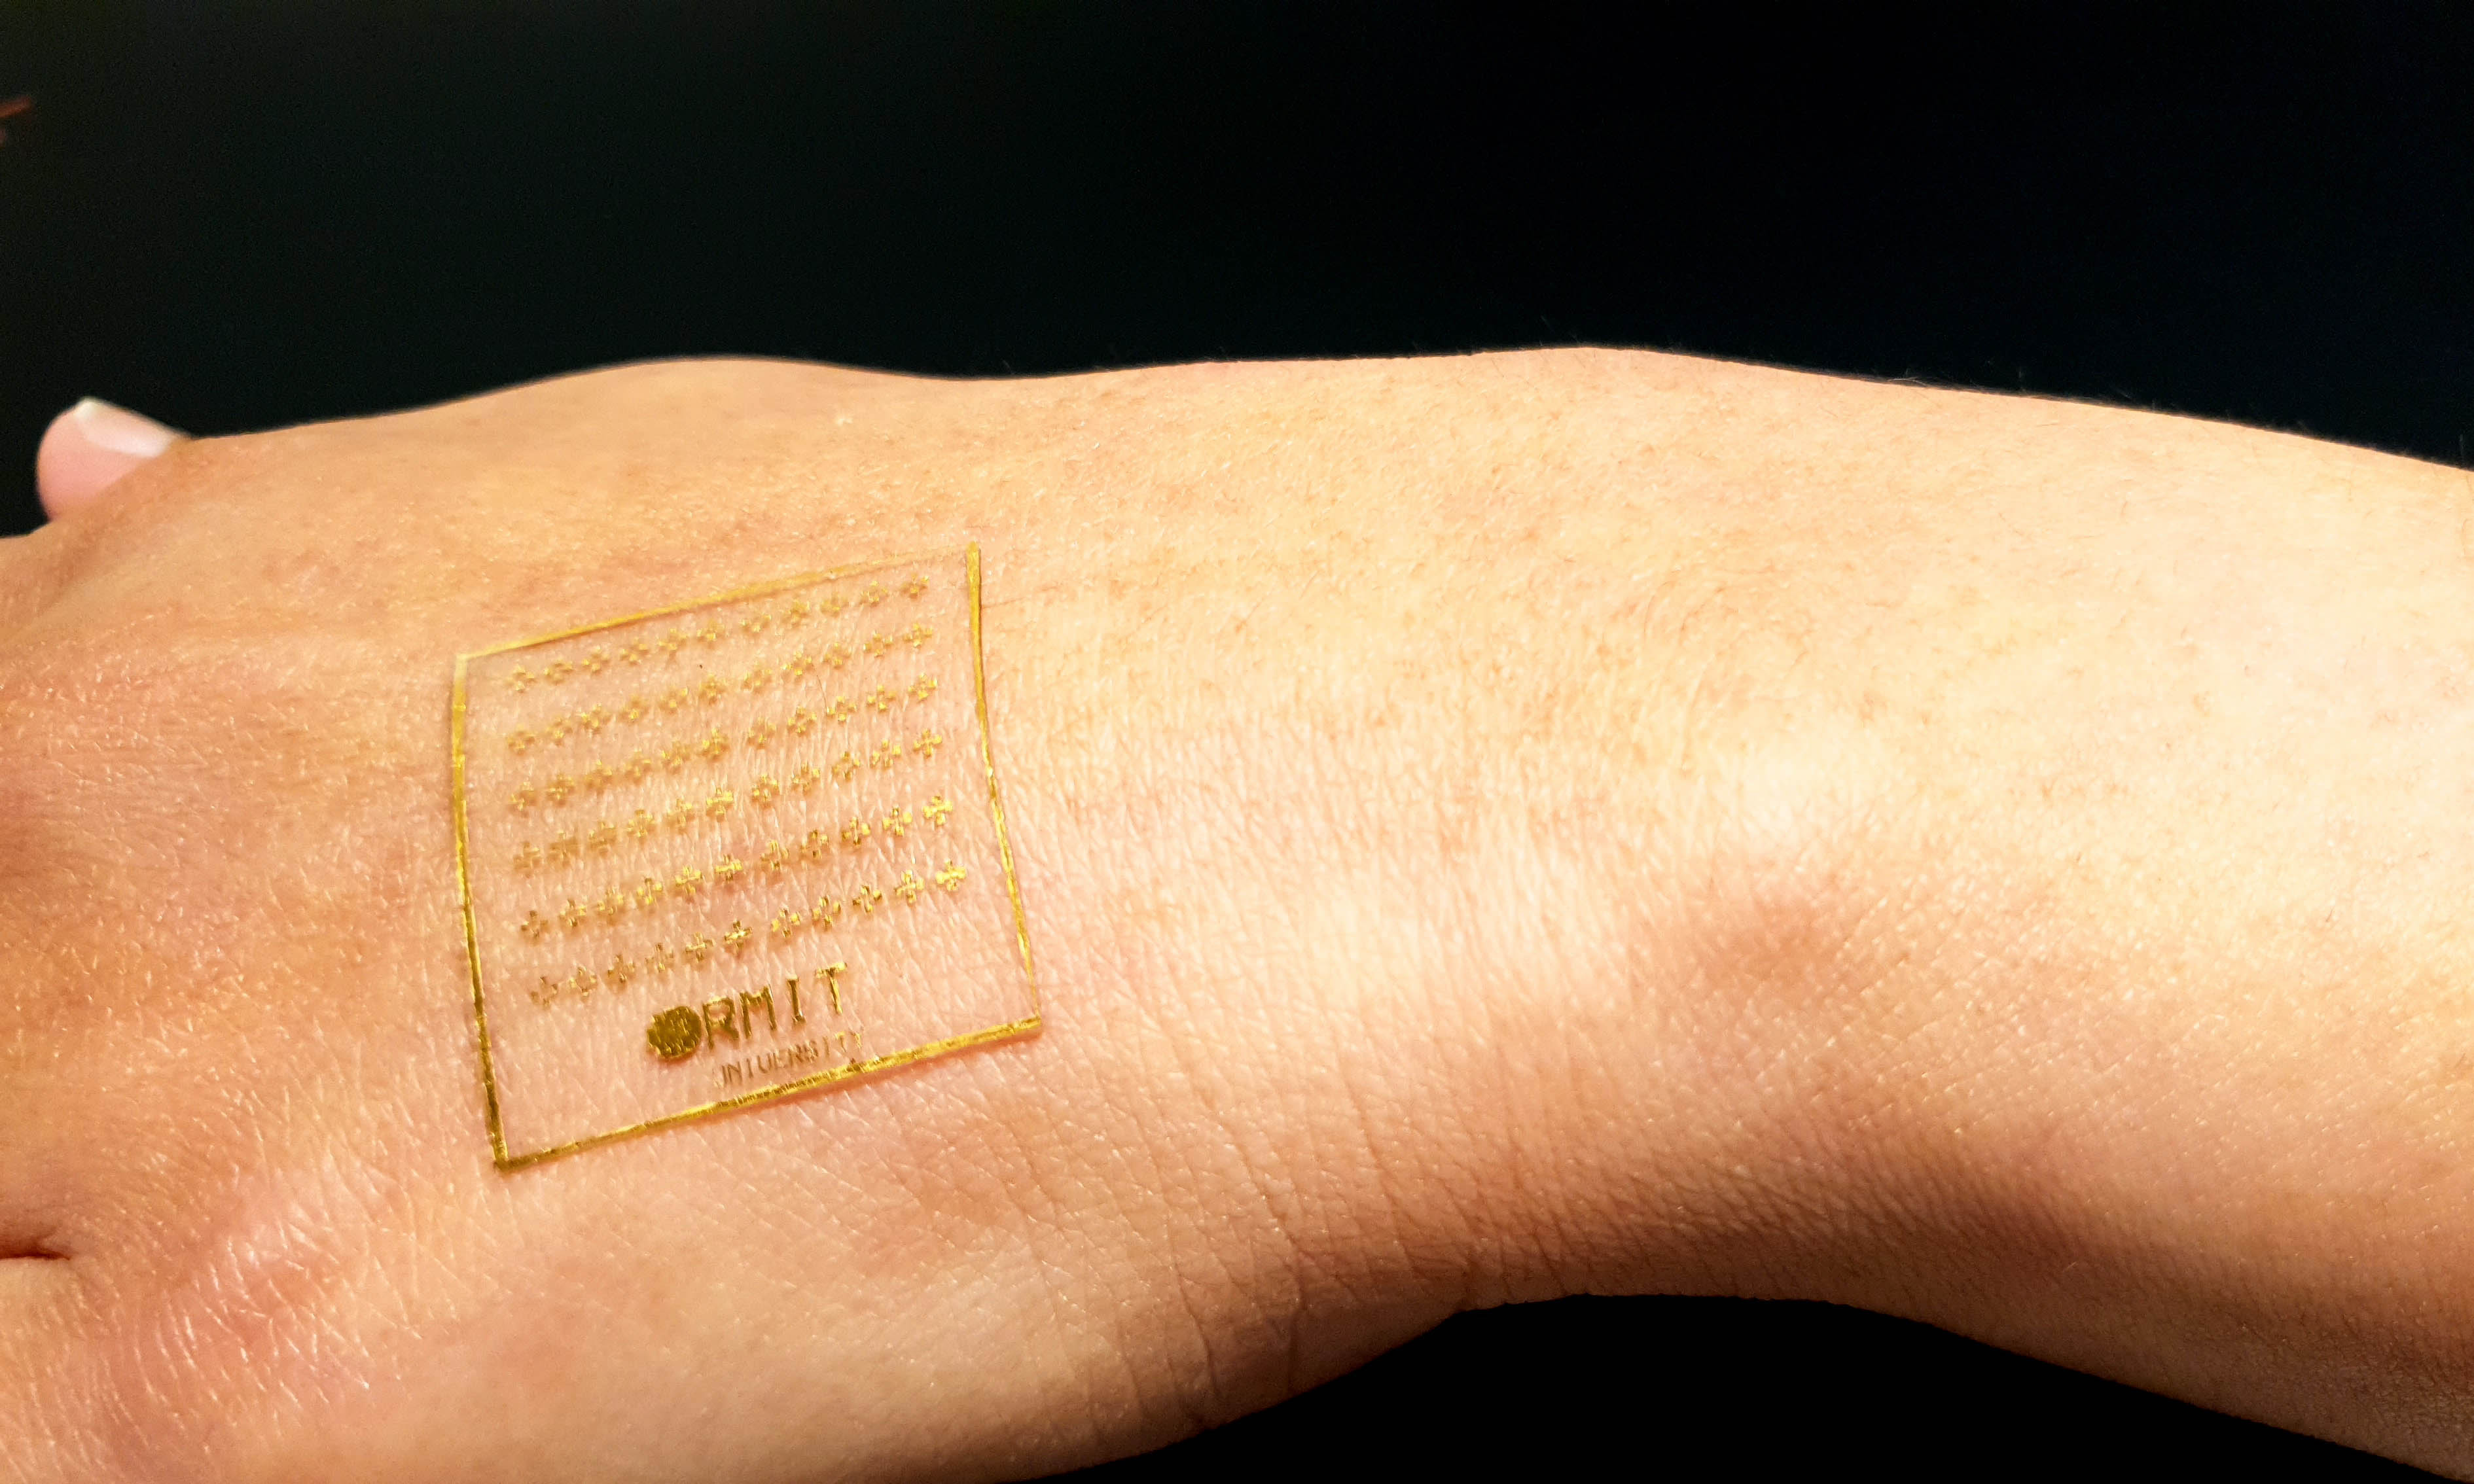 Clear stretchable electronic device on the back of a hand.